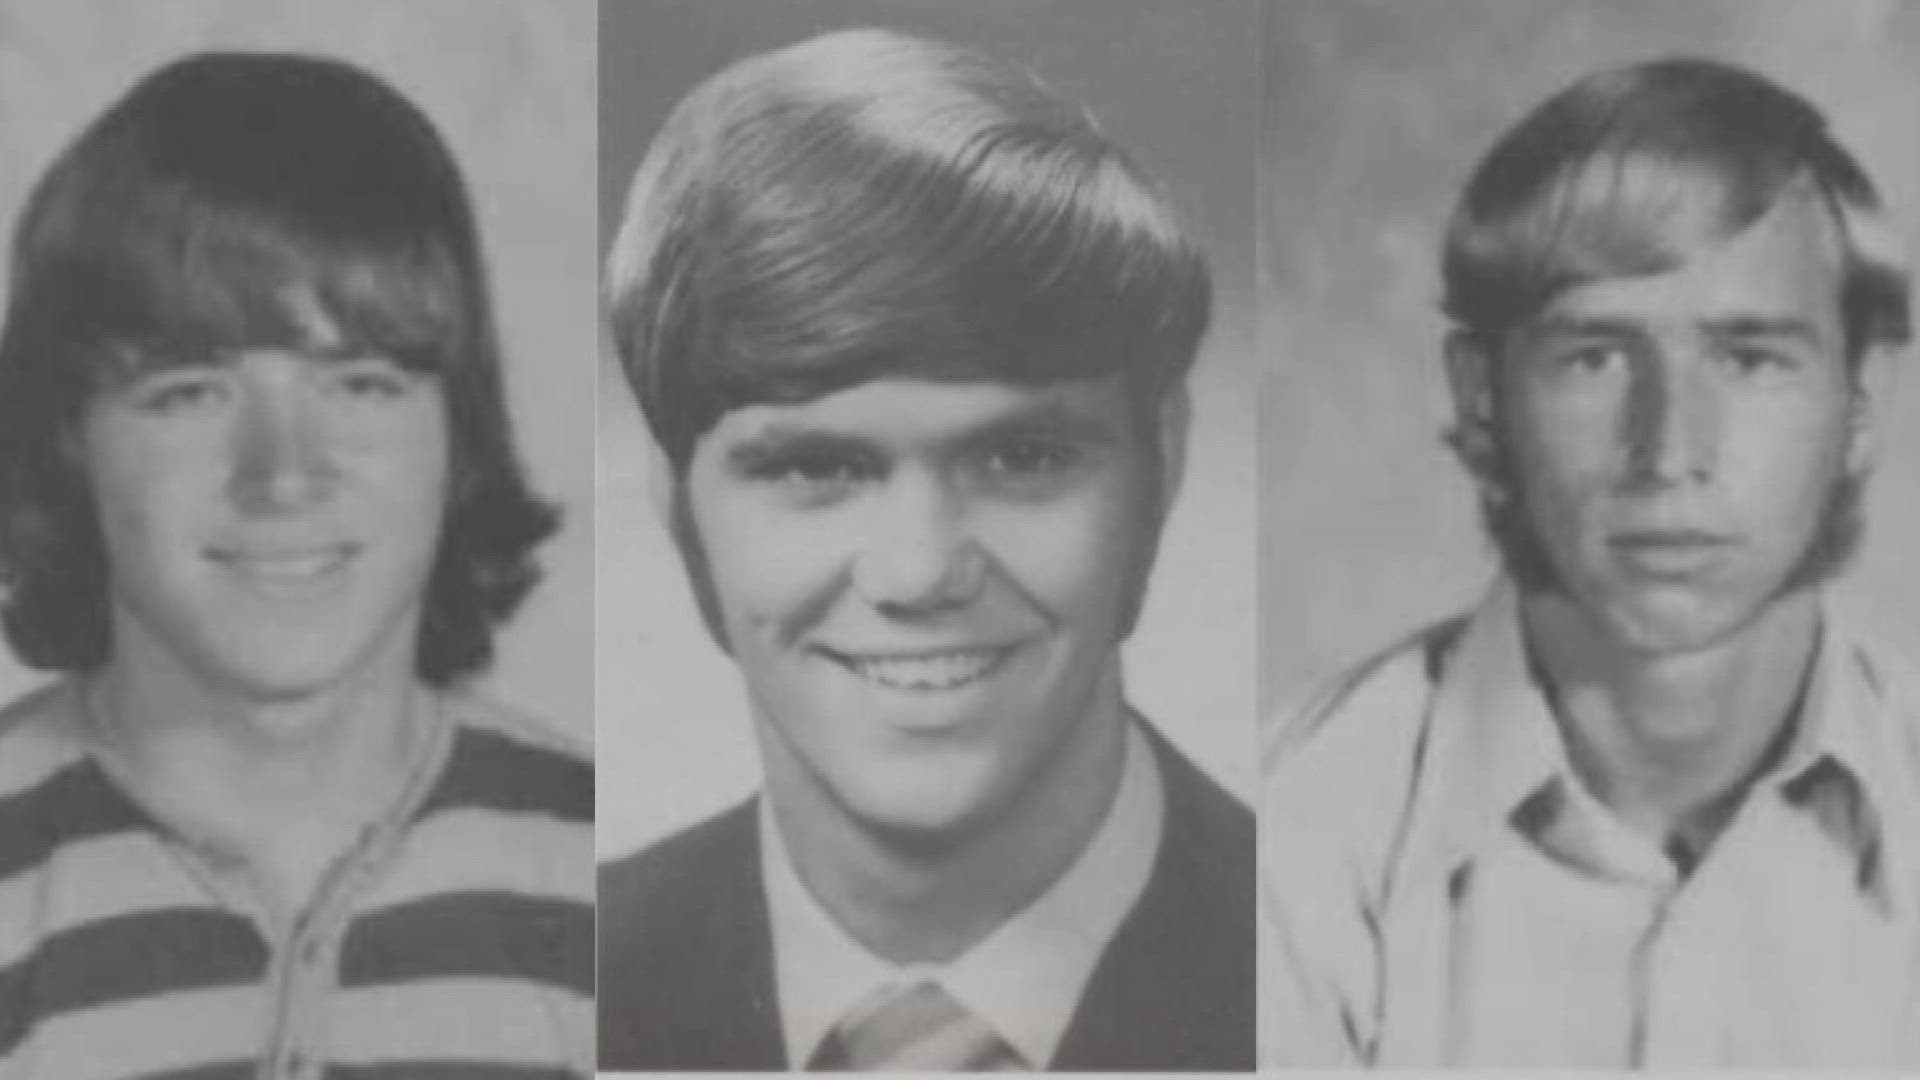 In 1971, two teens died and a third went missing inside a small cabin in Jackson County. Now, investigators are hoping for new answers.